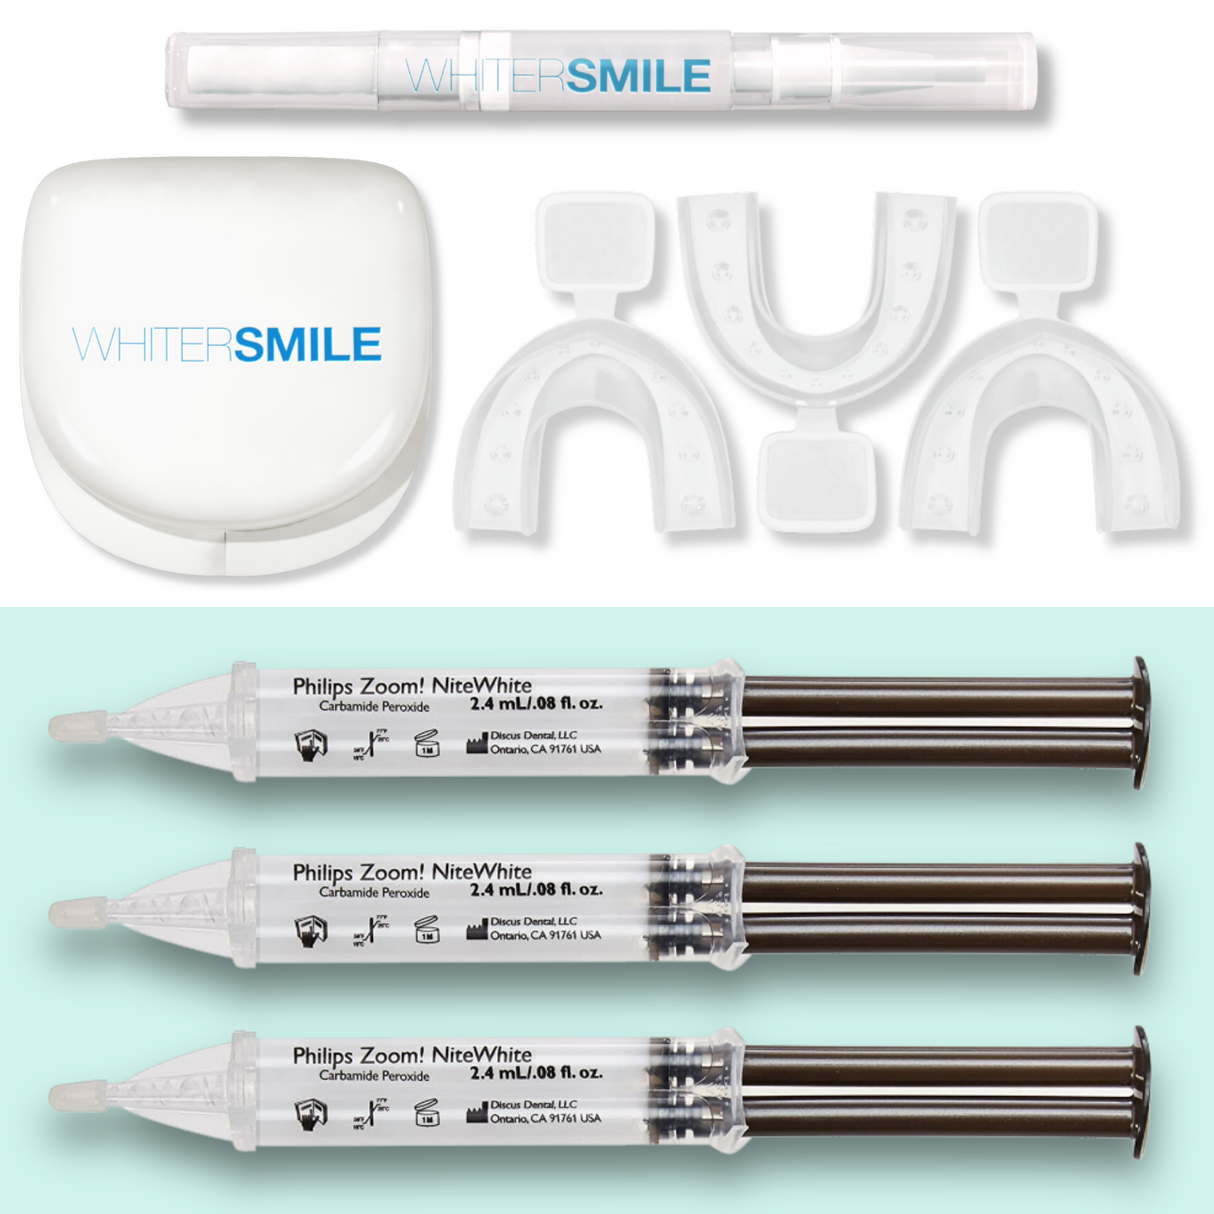 Philips ZOOM! Nite White Gel 16% CP Kit + Mouth Trays, Case & Top Up Pen - Whiter Smile